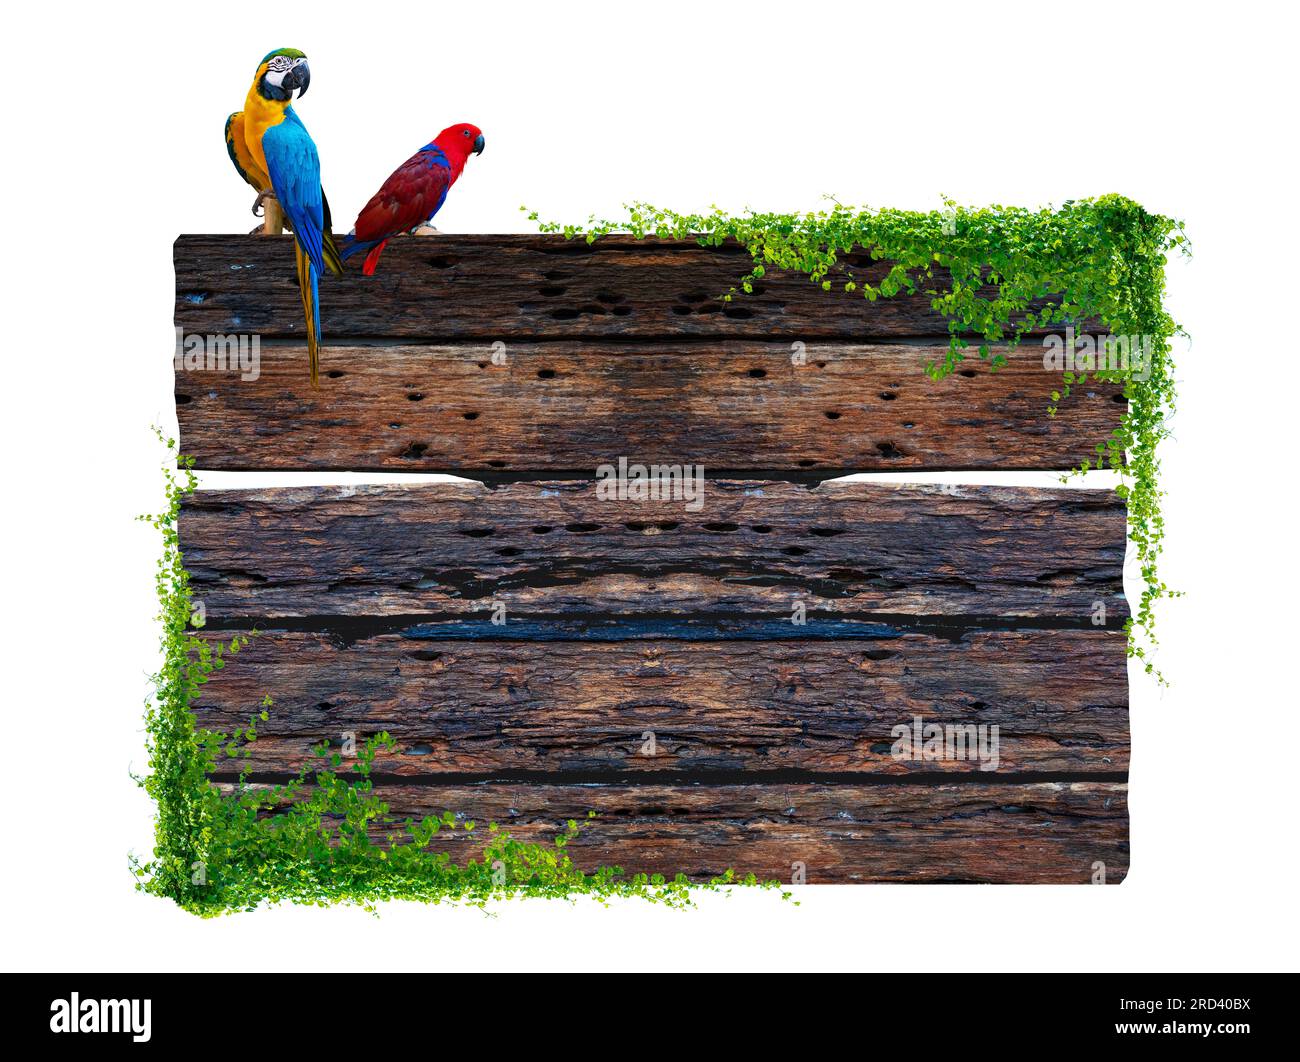 Dark brown antique plank frame background with tropical leaves and vines climbing the edge of the plank and perched on a macaw. Isolate Stock Photo